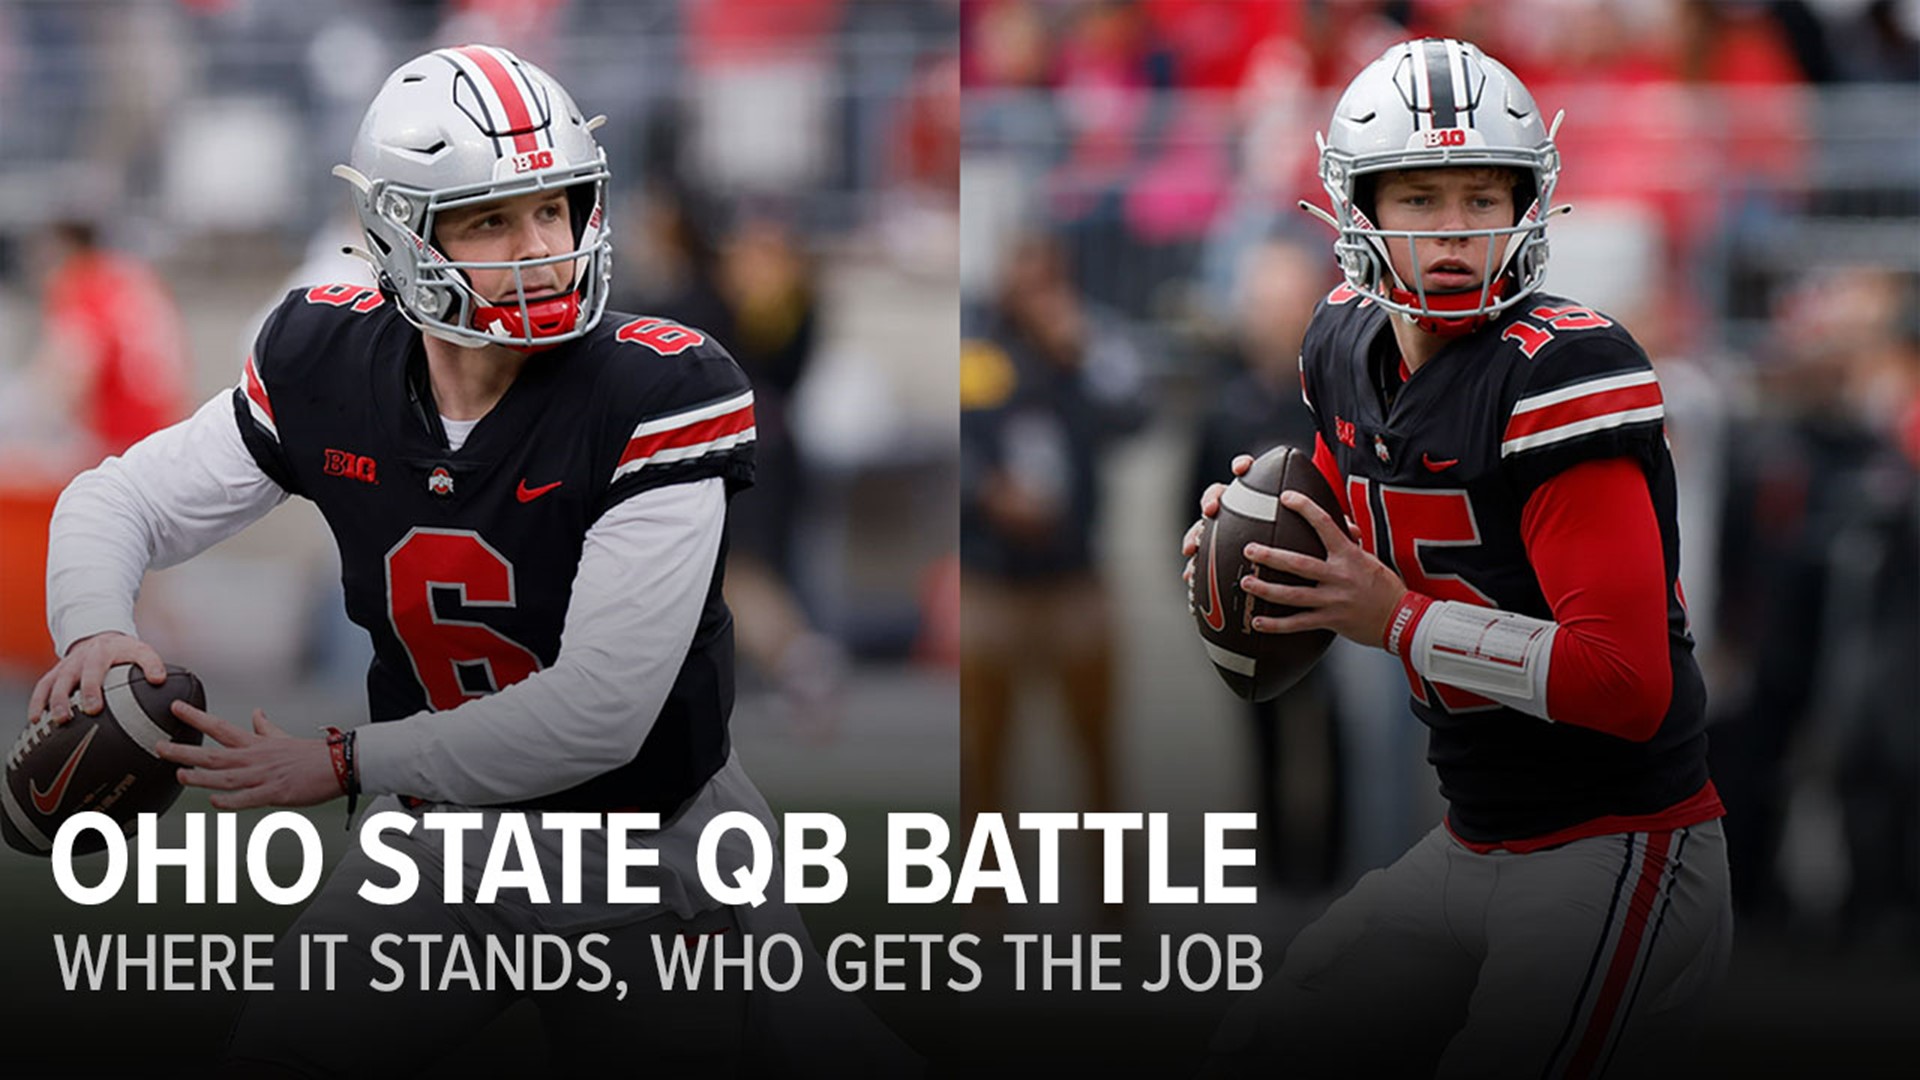 Kyle McCord and Devin Brown are competing to be the Ohio State Buckeye's next starting quarterback.